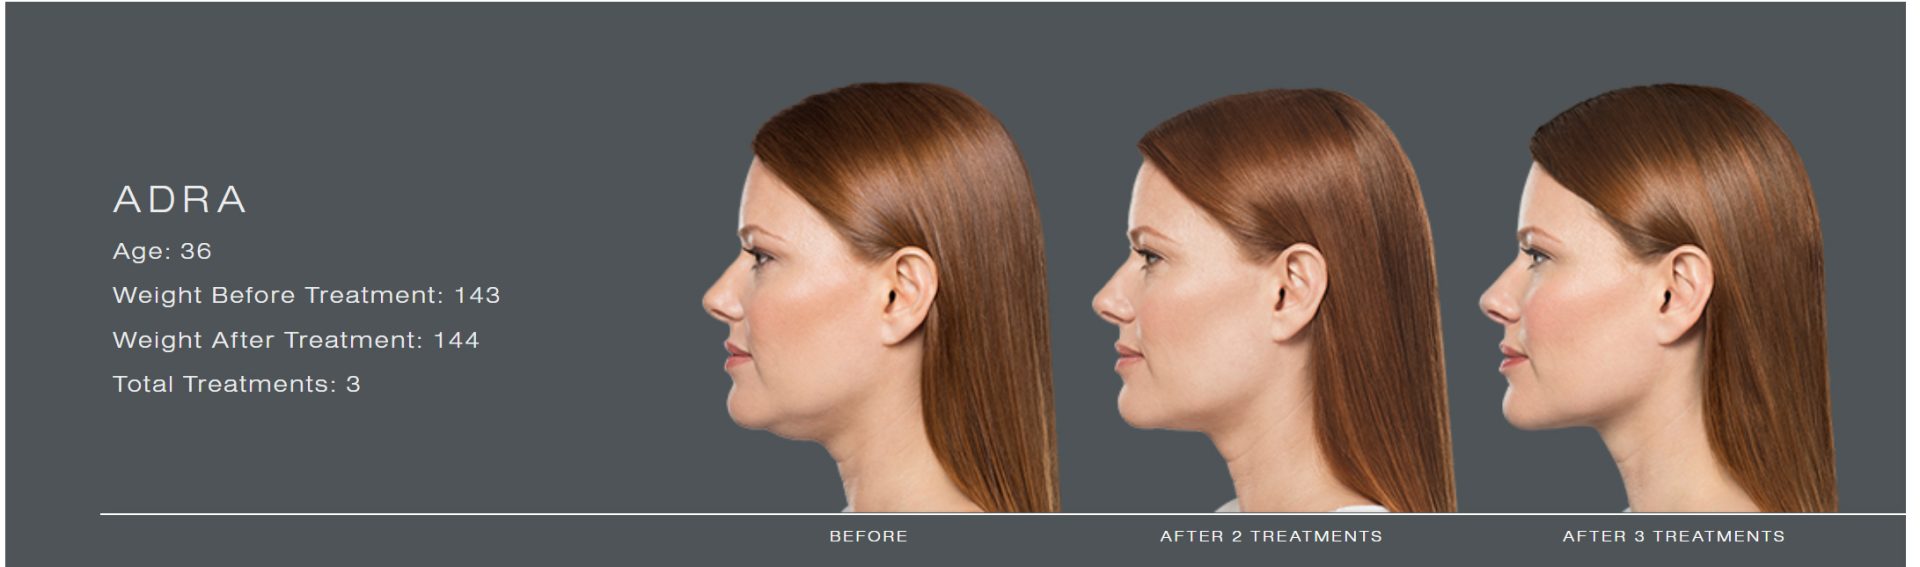 Kybella Injections for Chin Fat Reduction